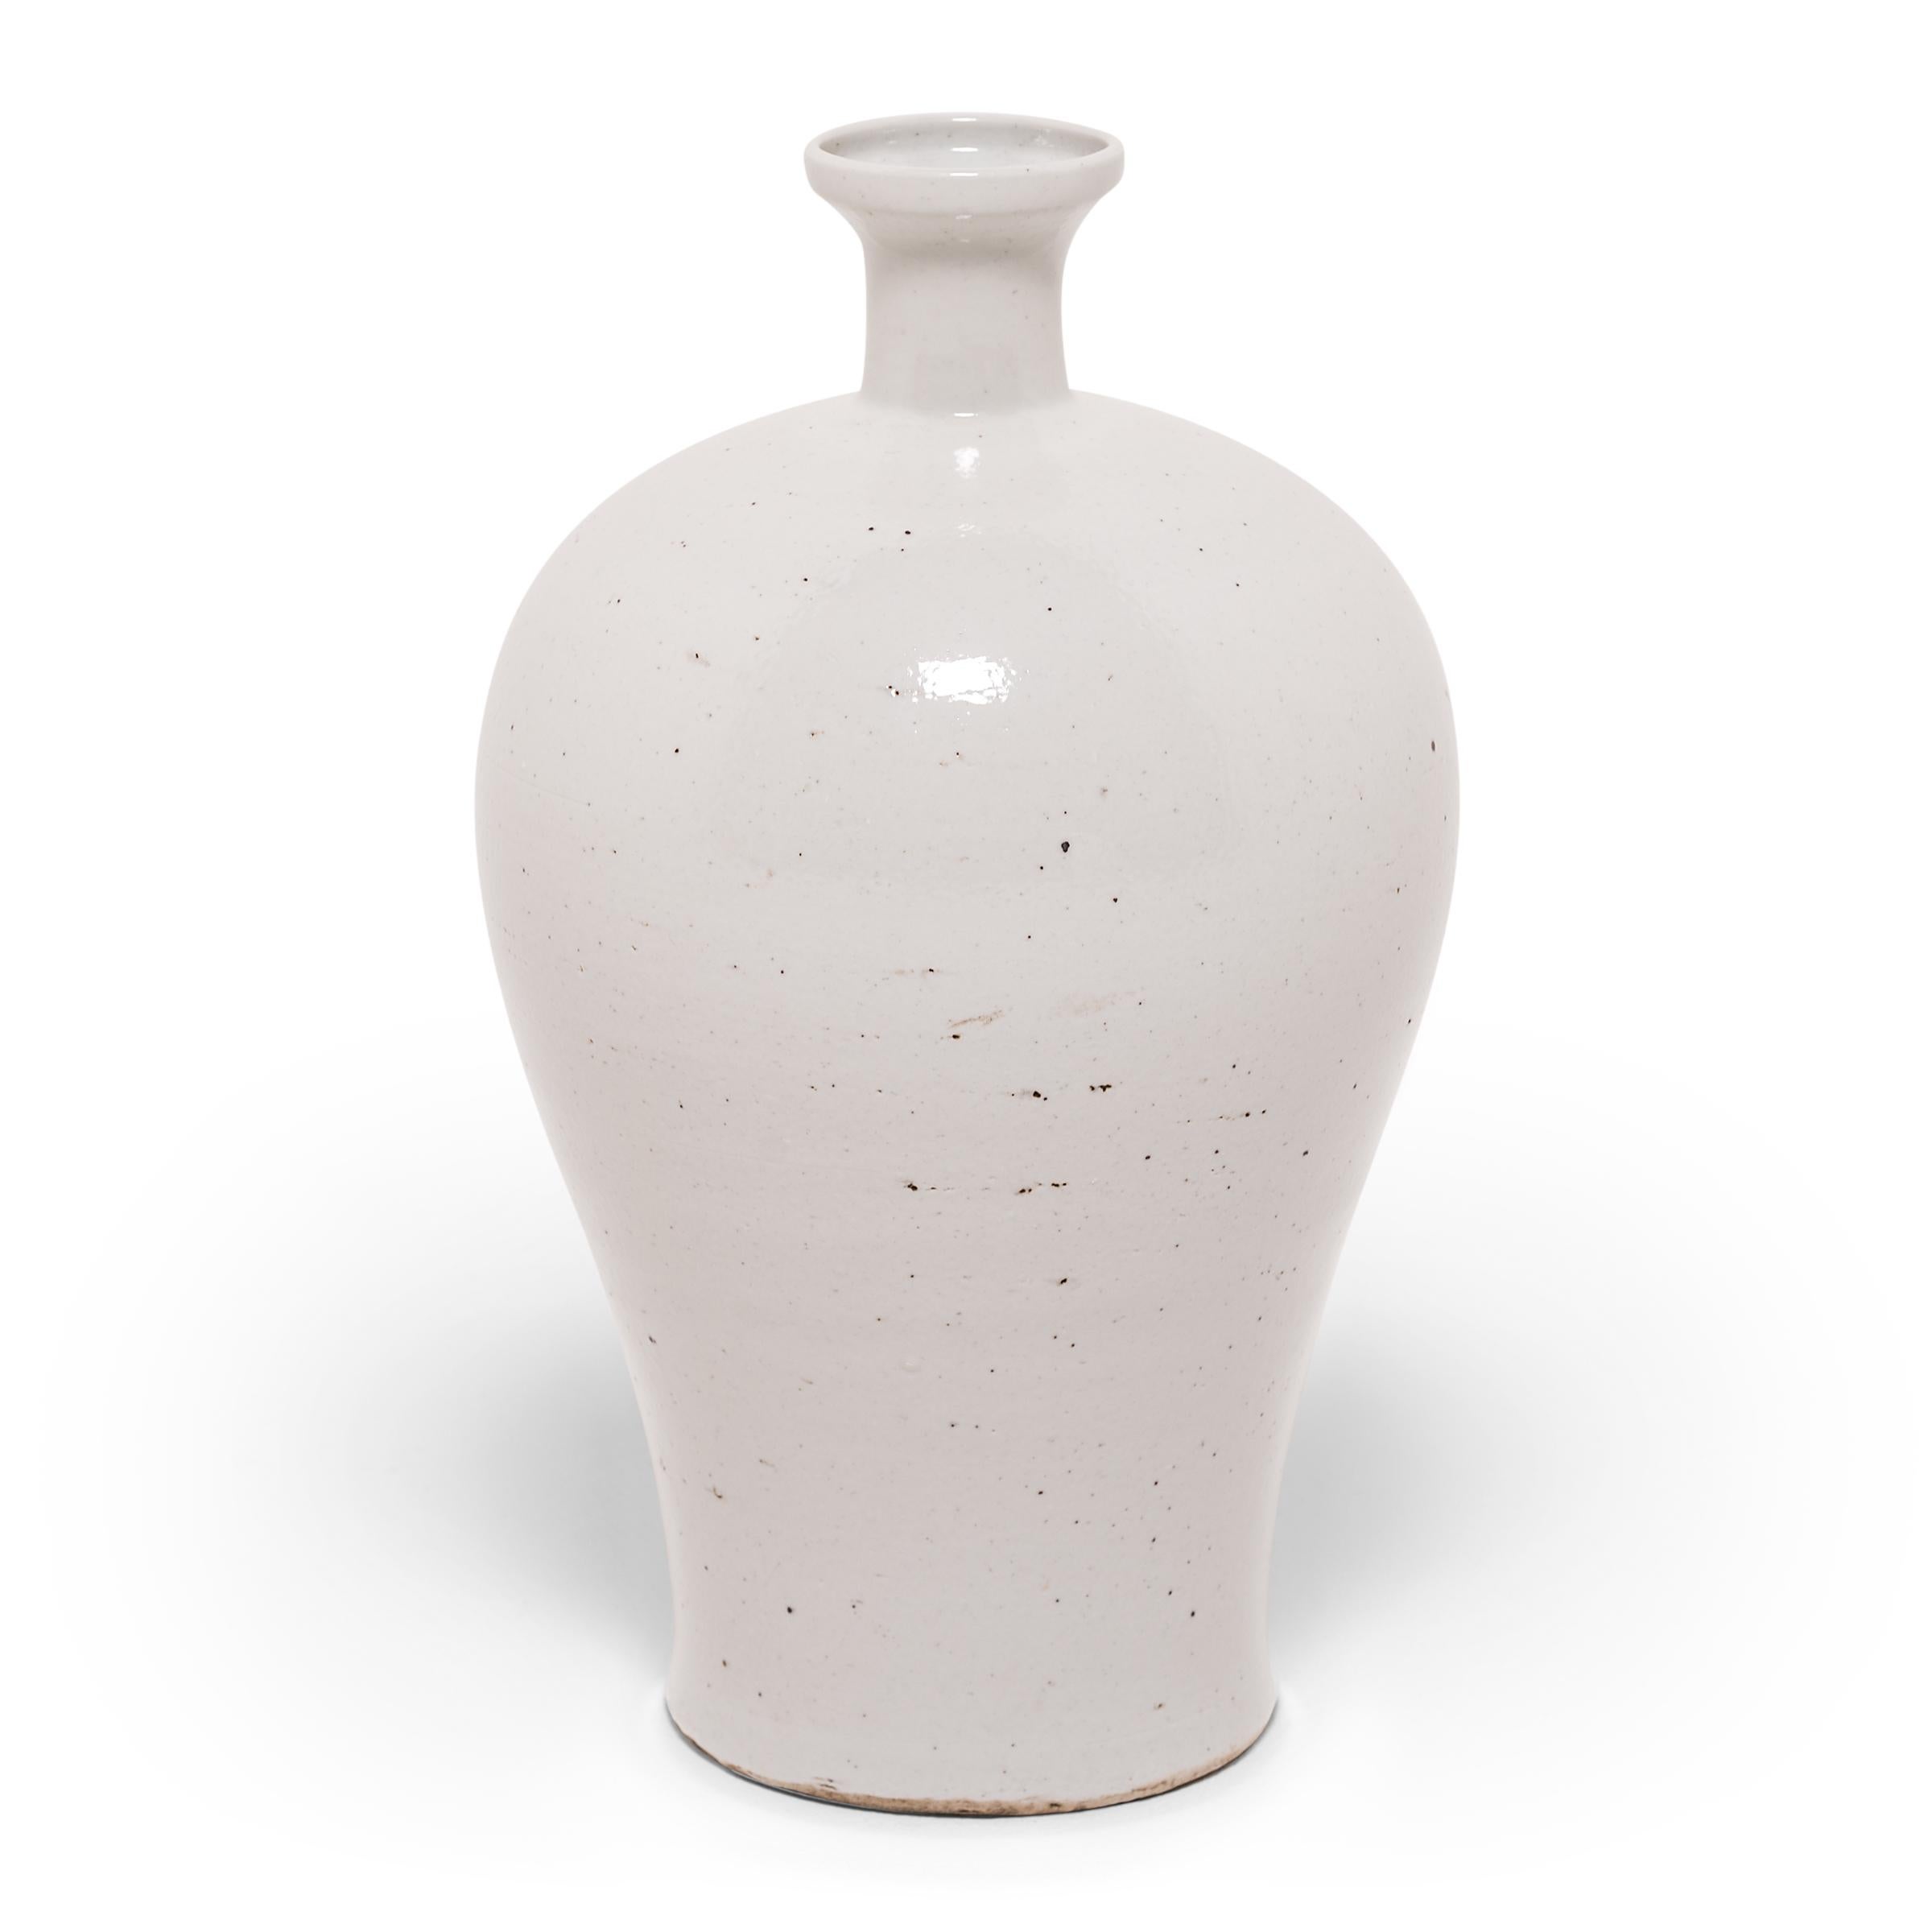 Meiping vases were traditionally used to hold the branches of plum trees, celebrated in China as symbols of strength and longevity. This contemporary update, made in China's Zhejiang province, streamlines the meiping design, cloaking it in a milky